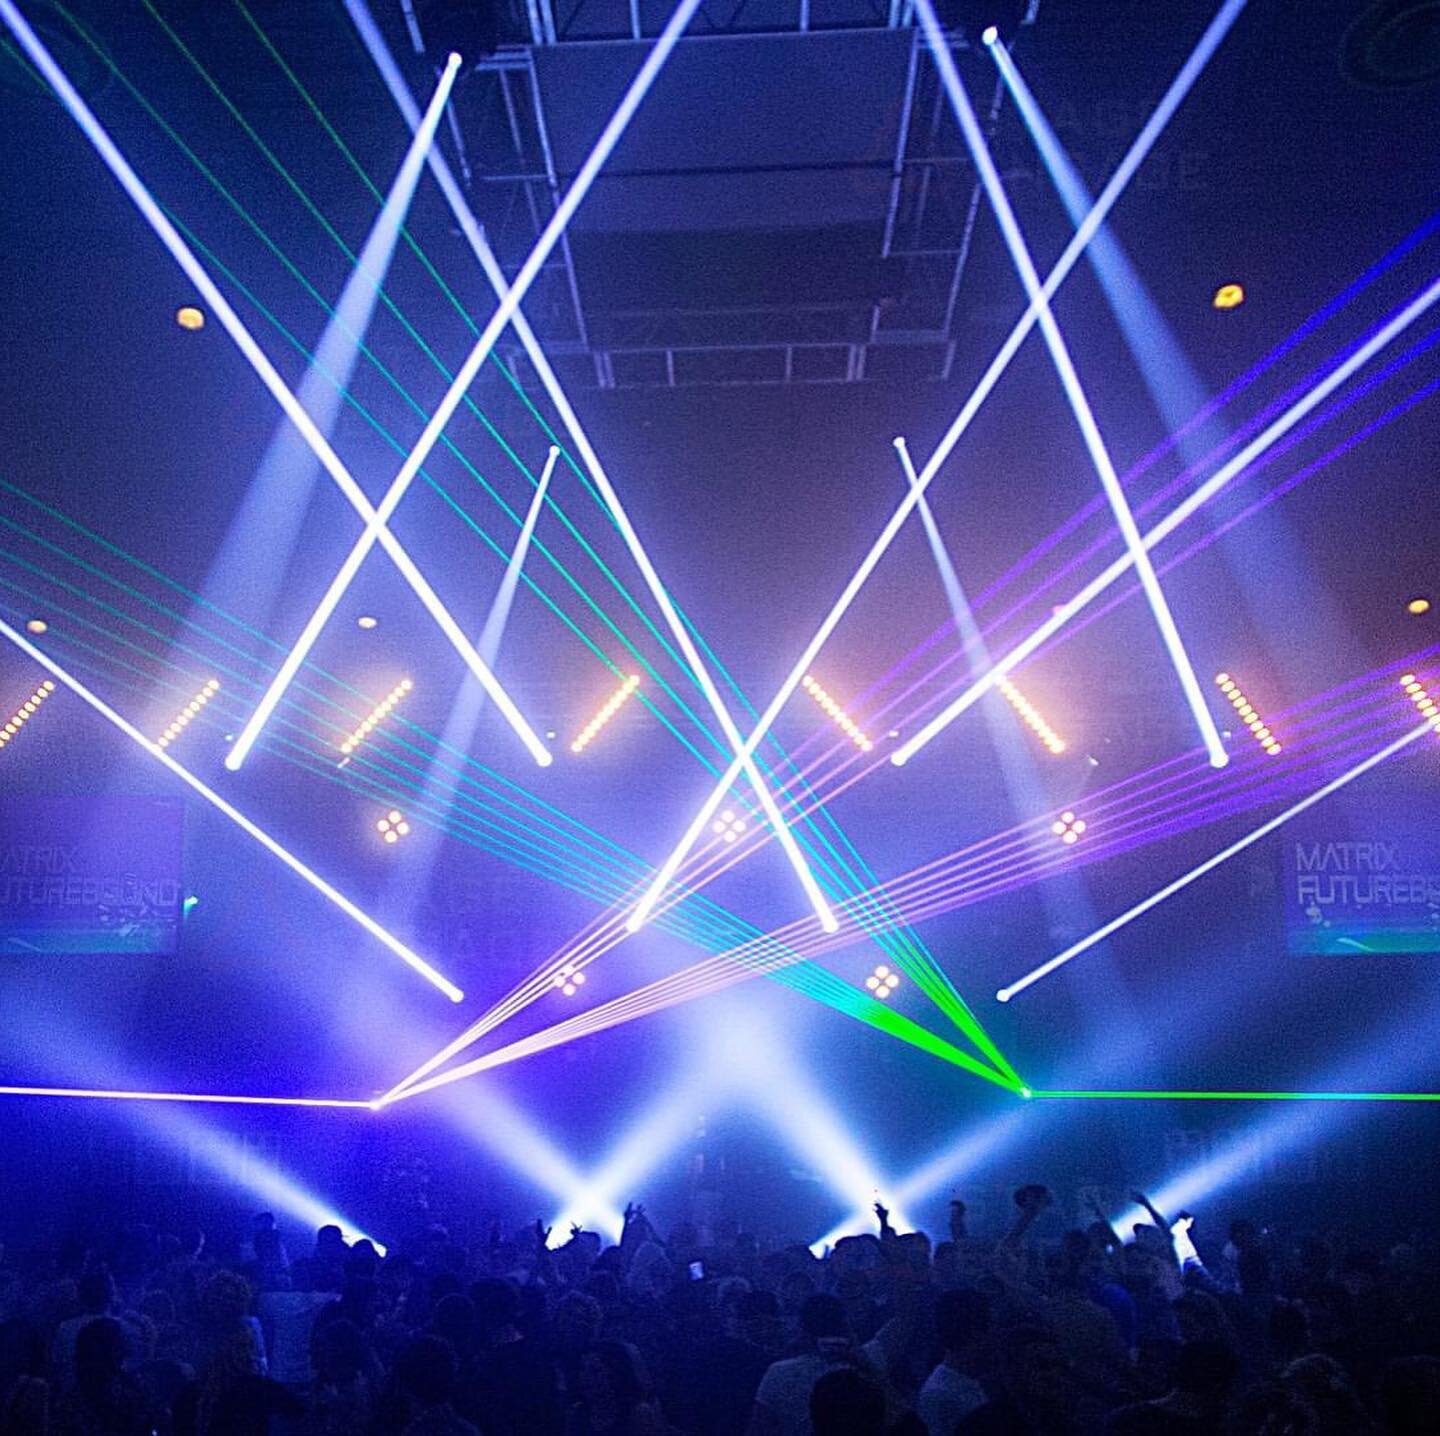 A few nostalgic scenes from Rinseout NYE 2013. #lightingdesign #nye2013 #memories #allnight special thanks to @jamietrant for the hard work and design he put into this night.